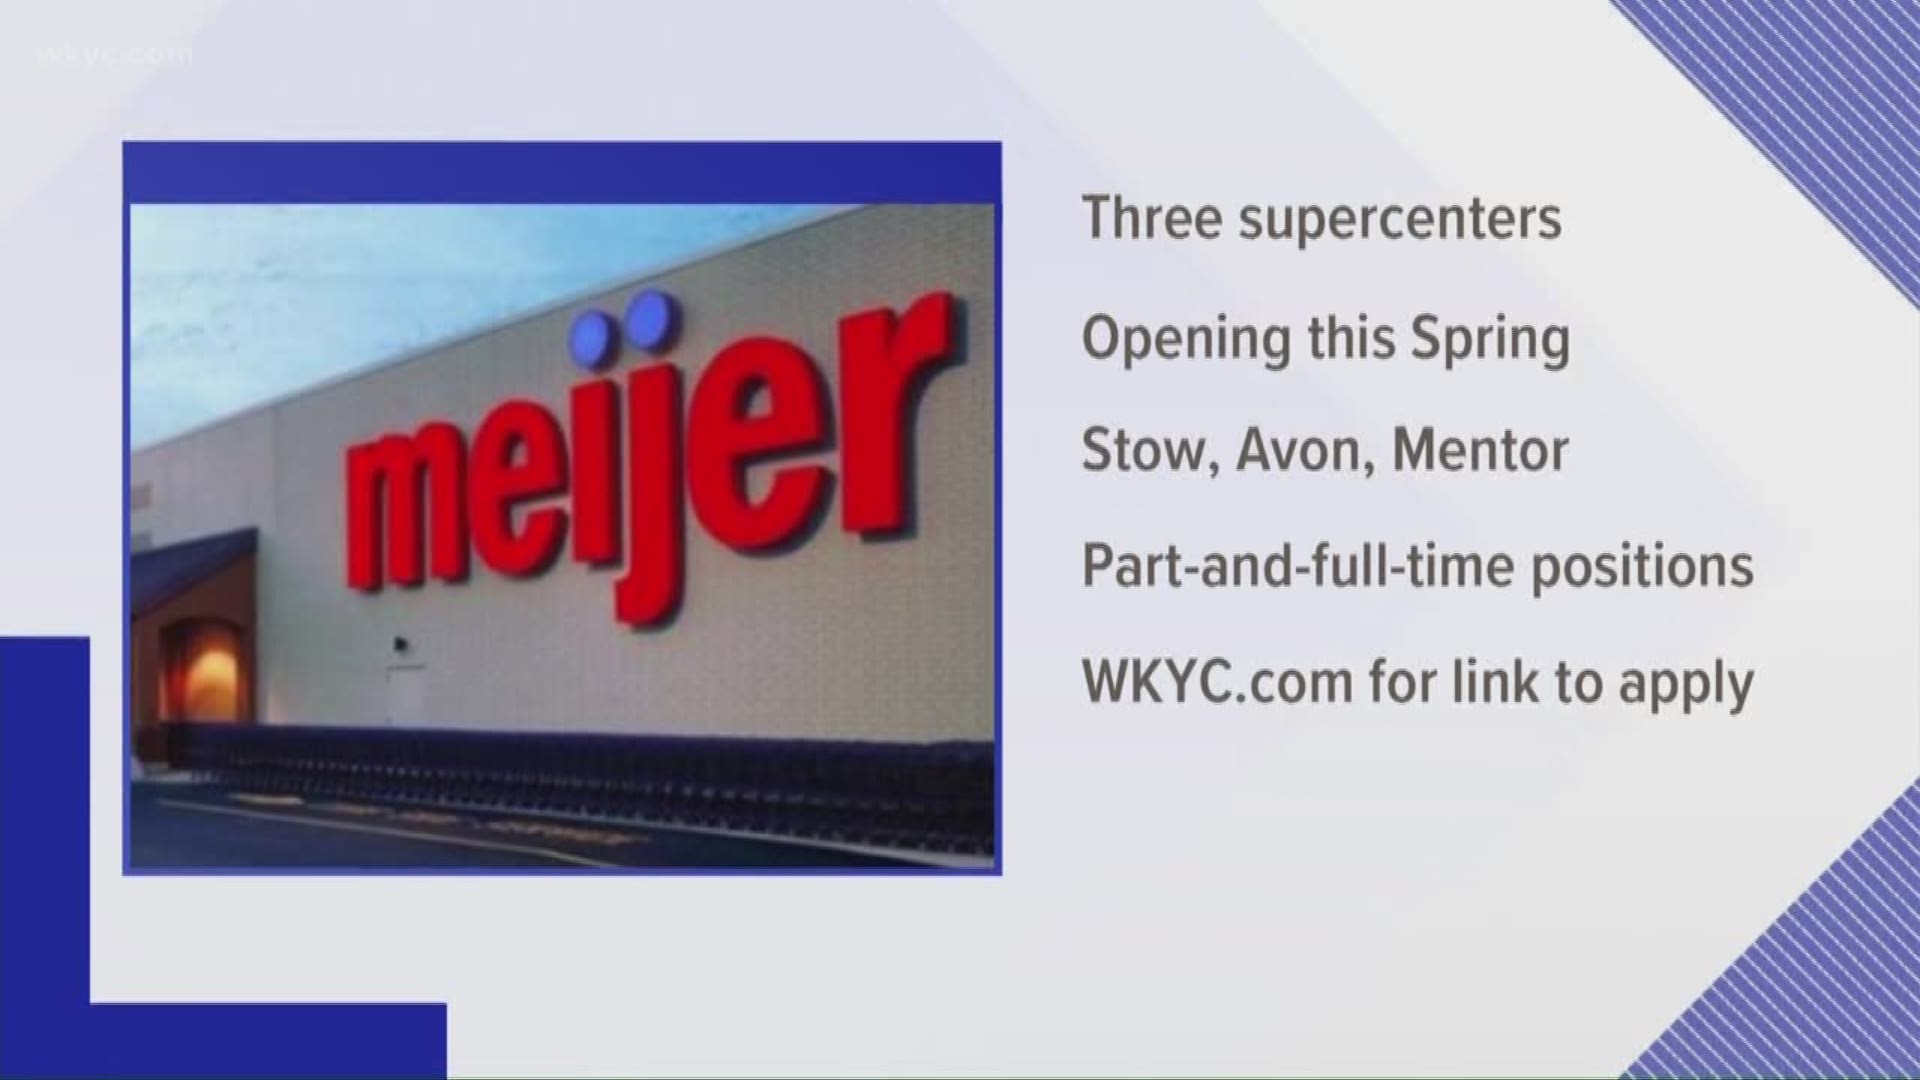 Meijer to hire 900 people for first supercenters in Northeast Ohio